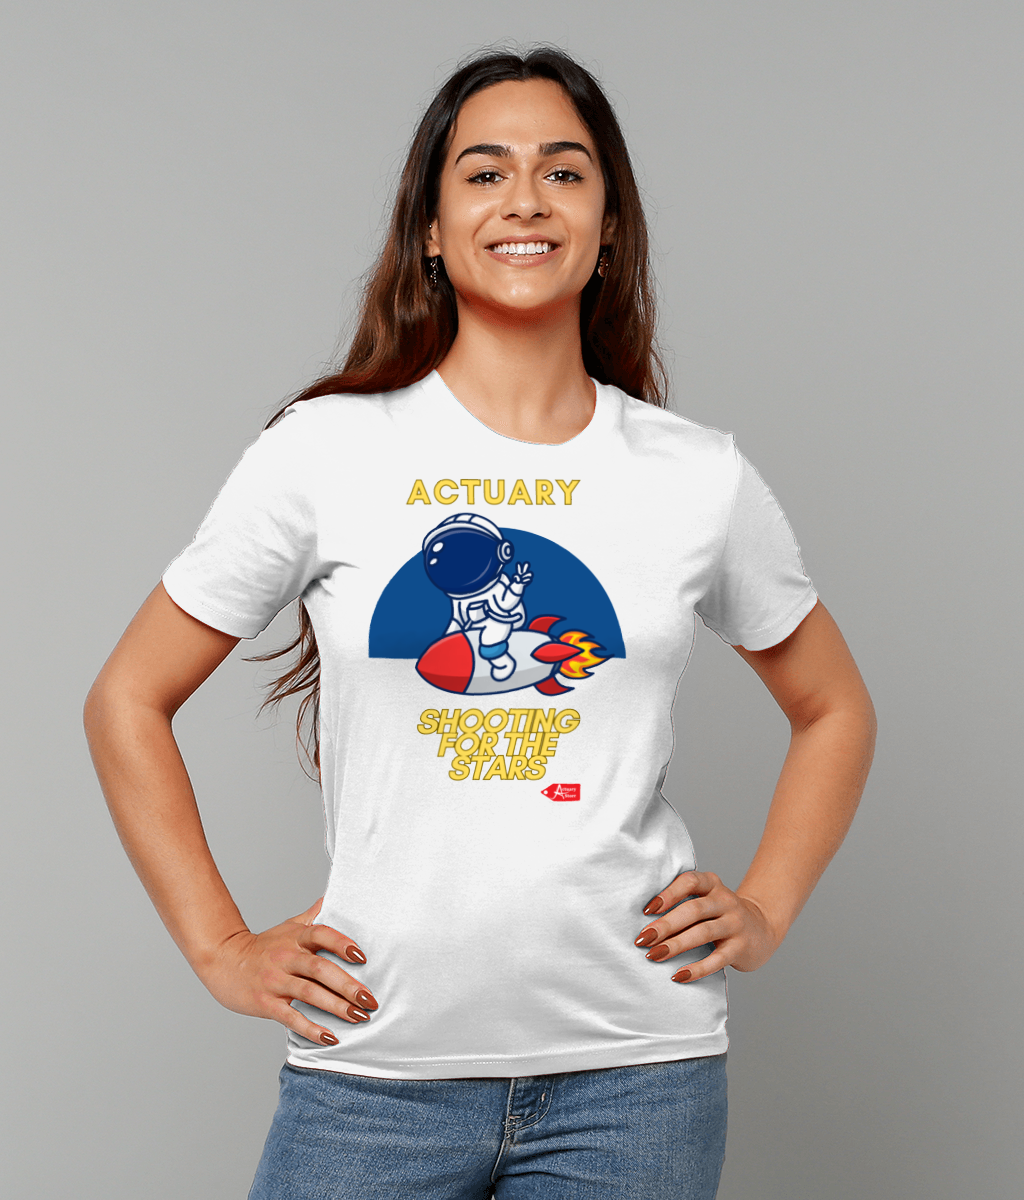 Actuary Shooting For The Stars Astronaut T-Shirt (Black and White Variants)